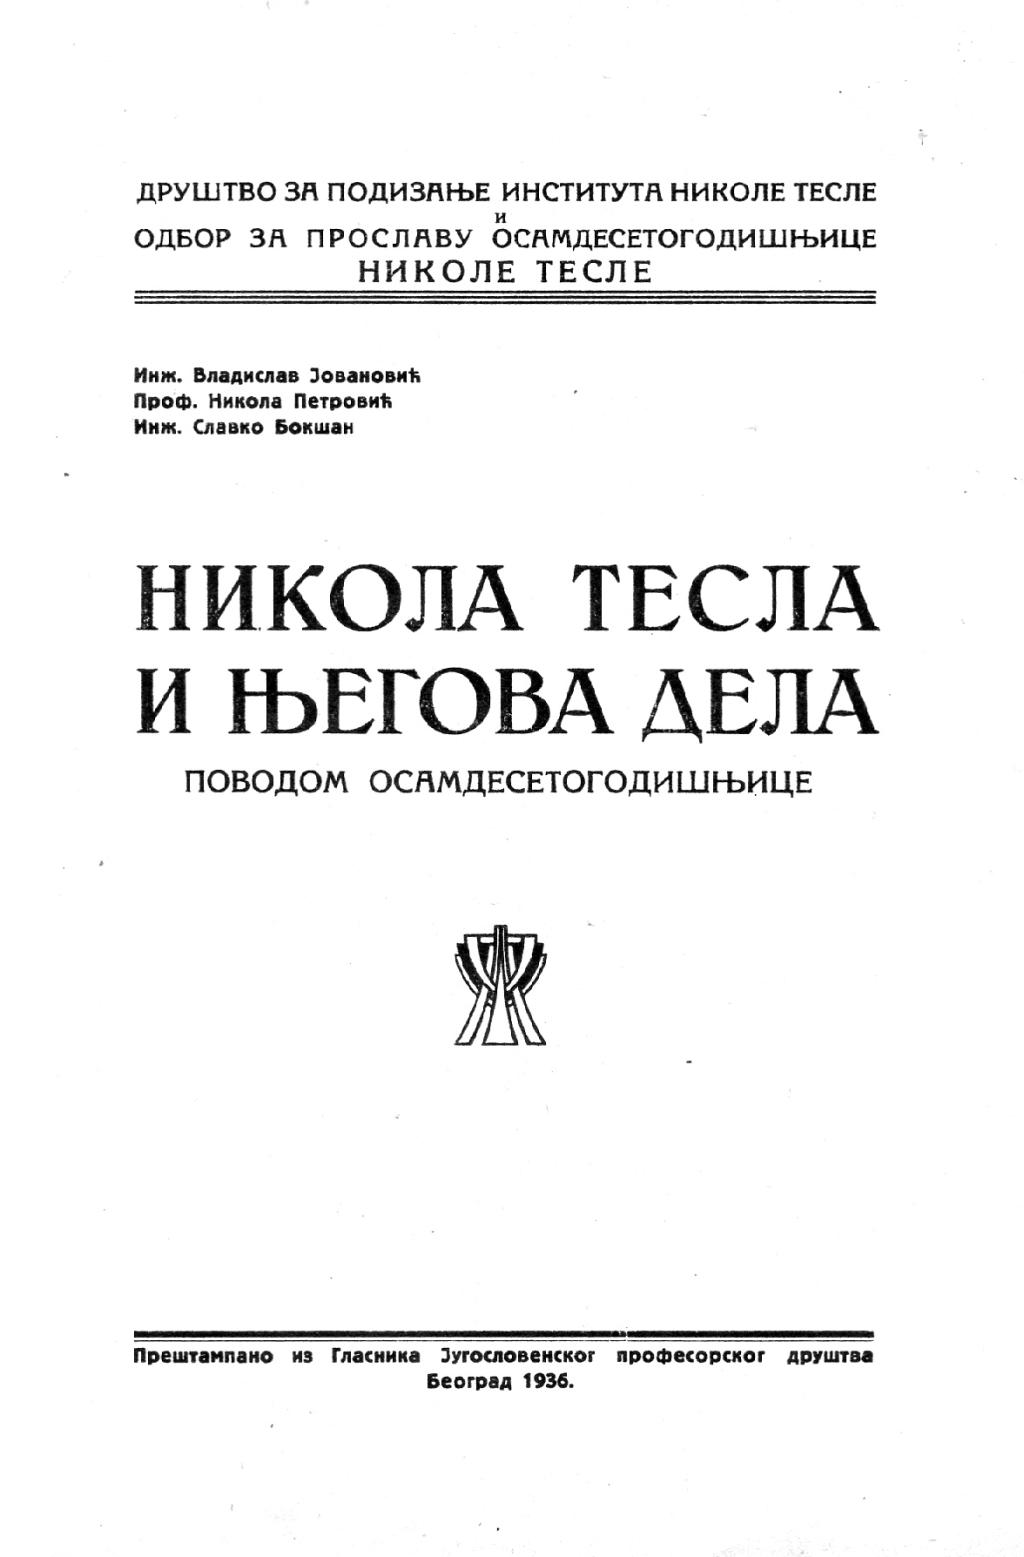 Nikola Tesla and His Works - On the Occassion of the Eightieth Anniversary - Front cover